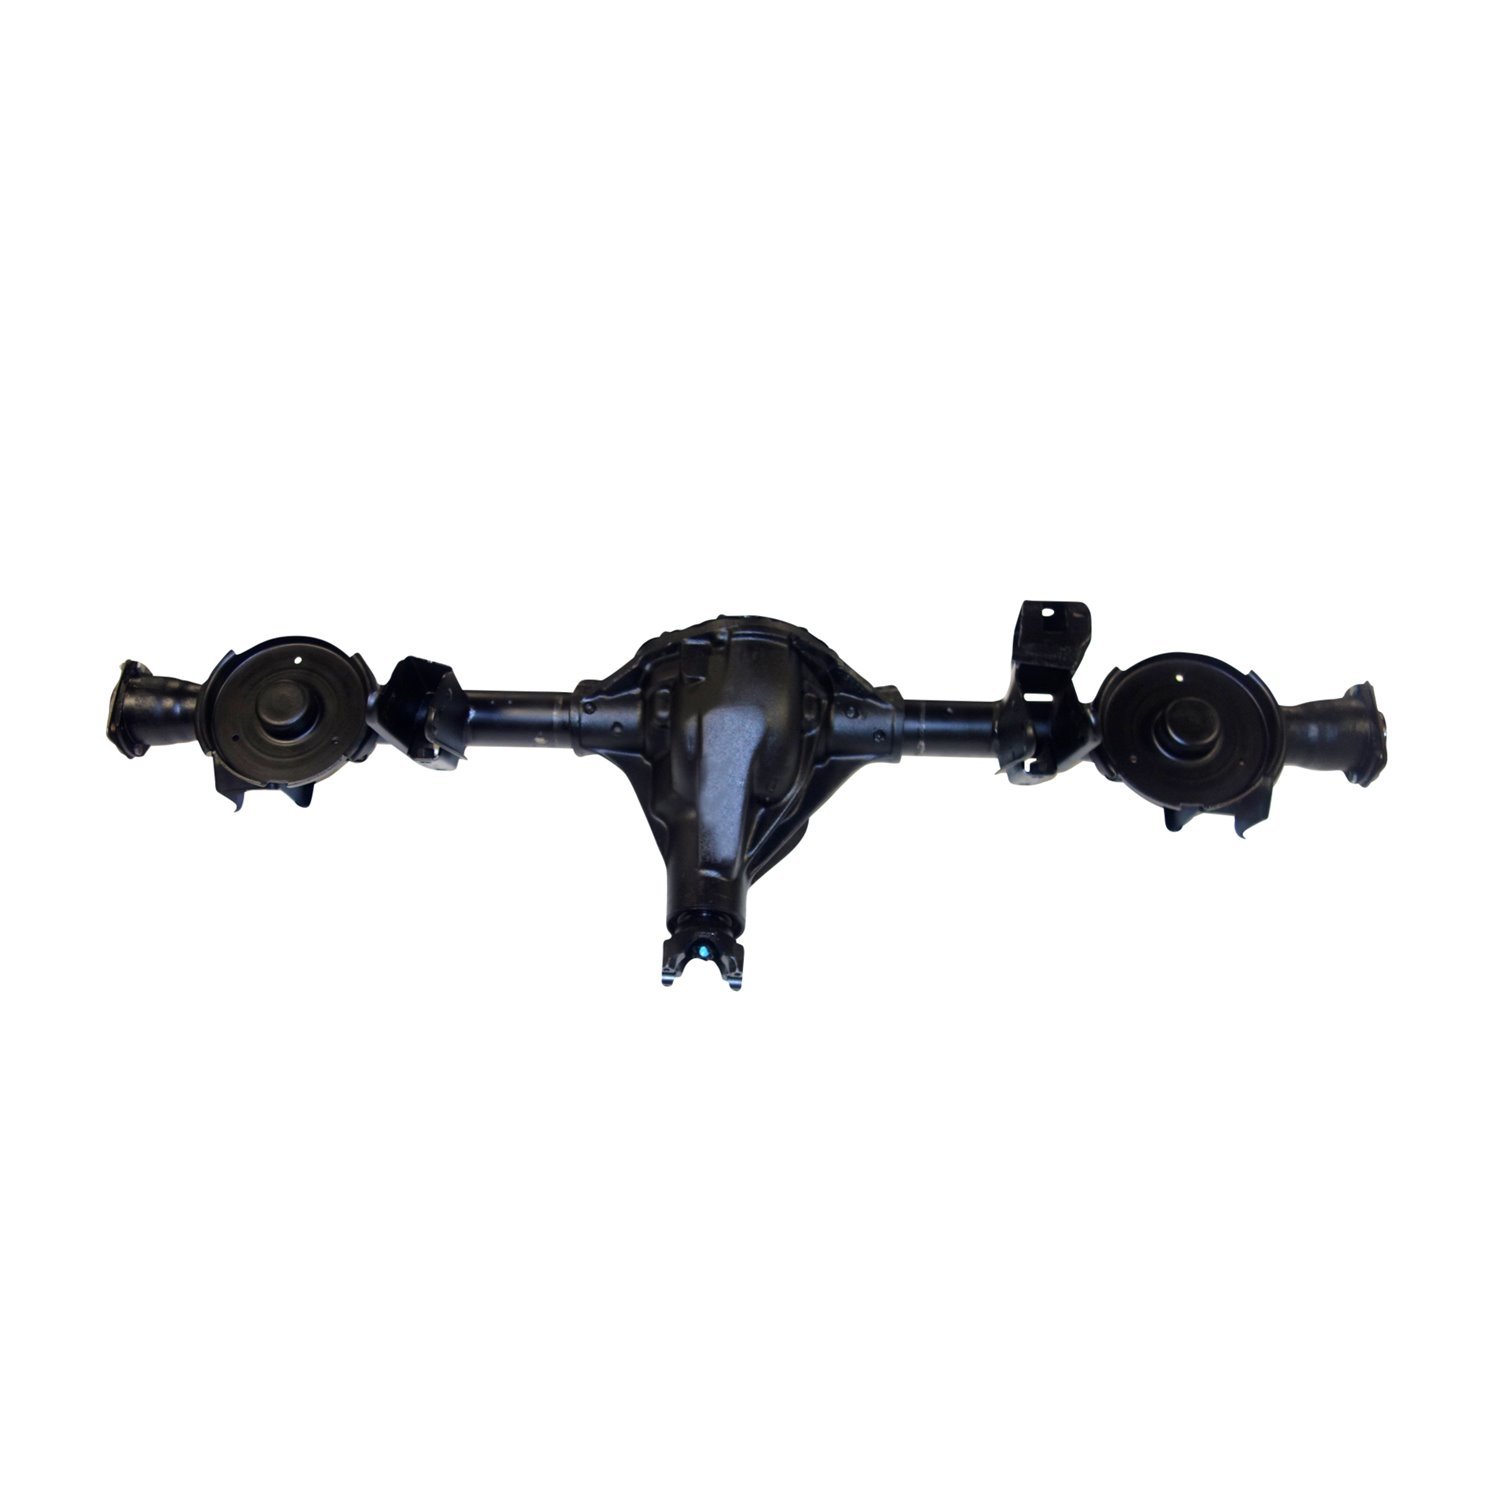 Remanufactured Complete Axle Assembly for Dana 44 07-15 Jeep Wrangler 3.21 Ratio